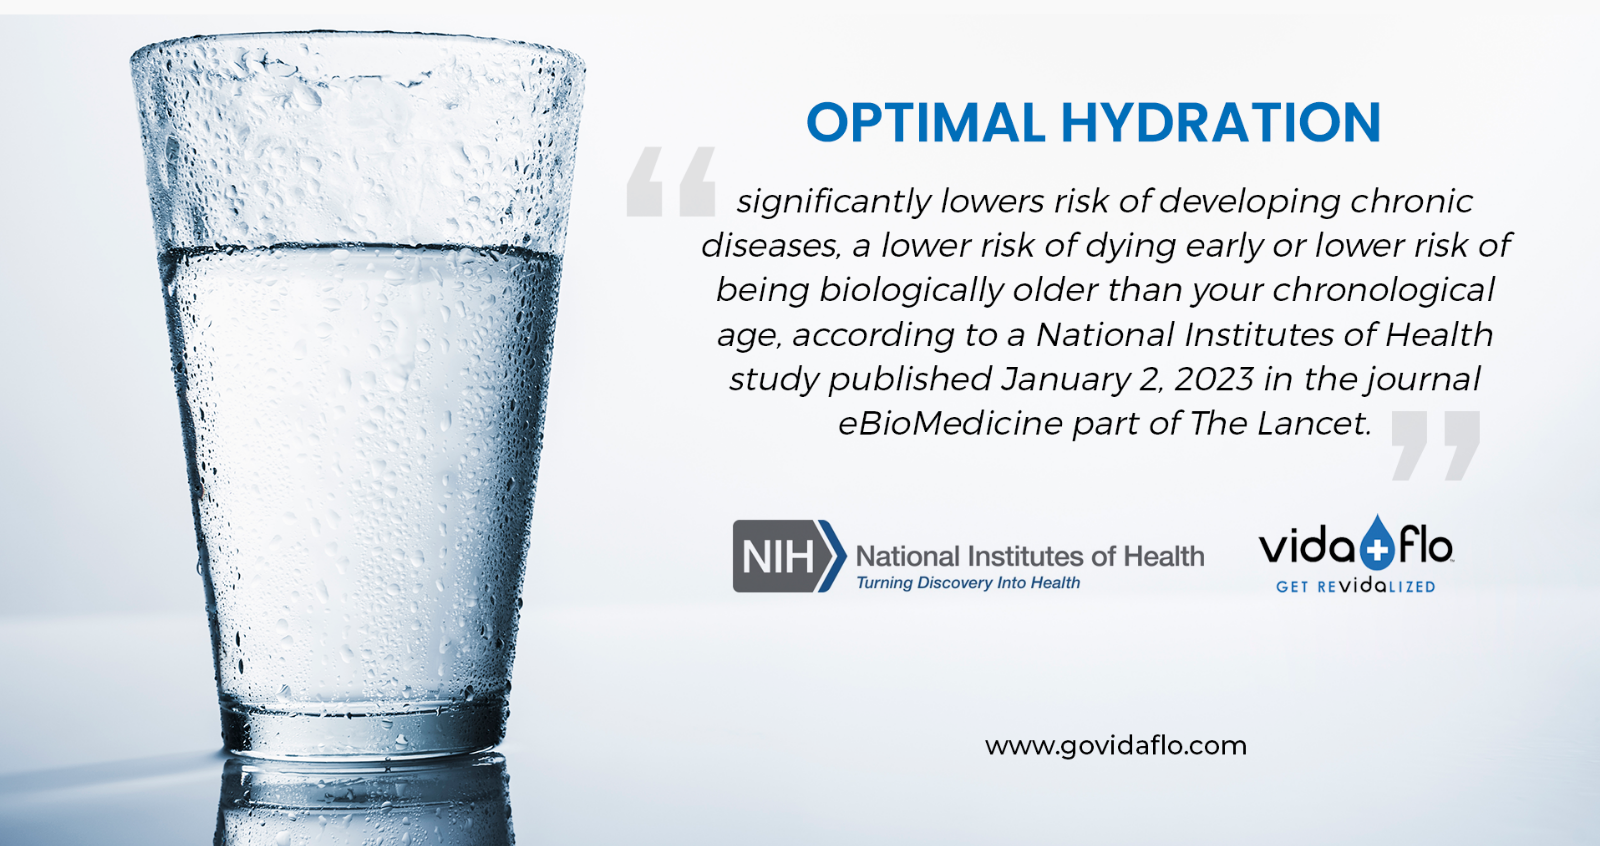 An image of a glass of water with a quote on optimal hydration in Murfreesboro, TN.